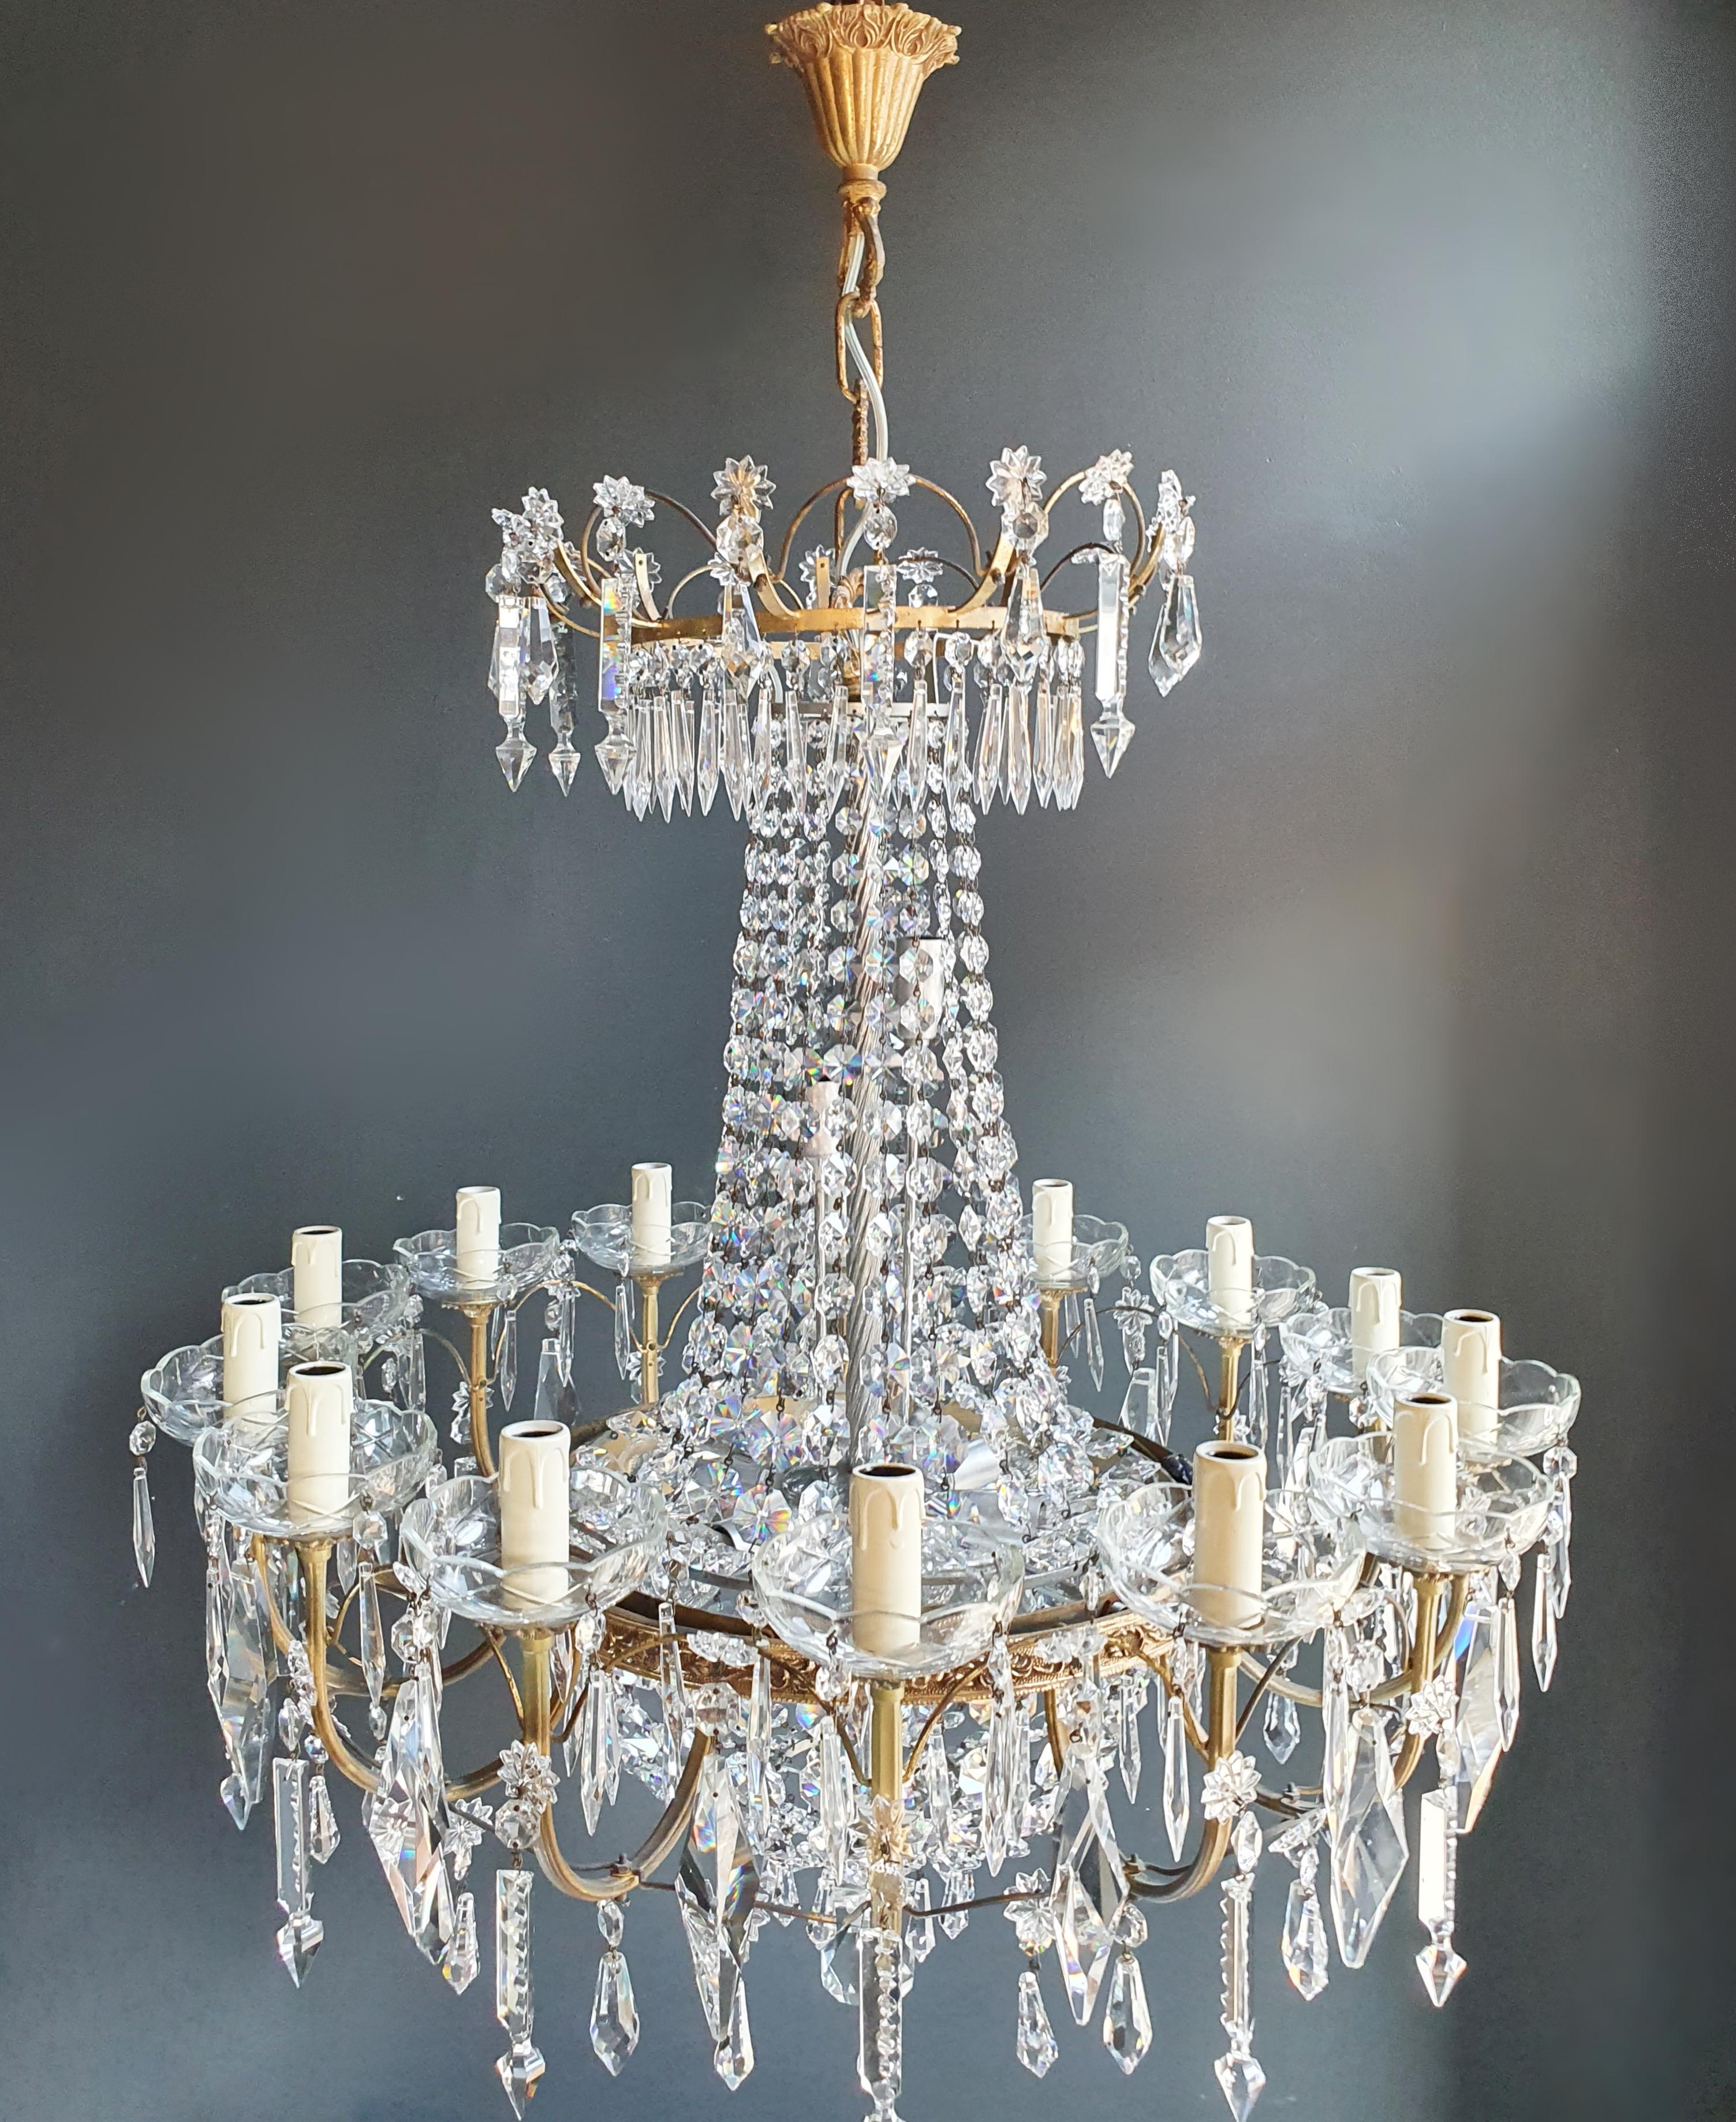 old chandelier with love and professionally restored in Berlin. electrical wiring works in the US. Re-wired and ready to hang. not one missing. Cabling completely renewed. Crystal, hand-knotted.

Measures: Total height 99 cm, height without chain 85